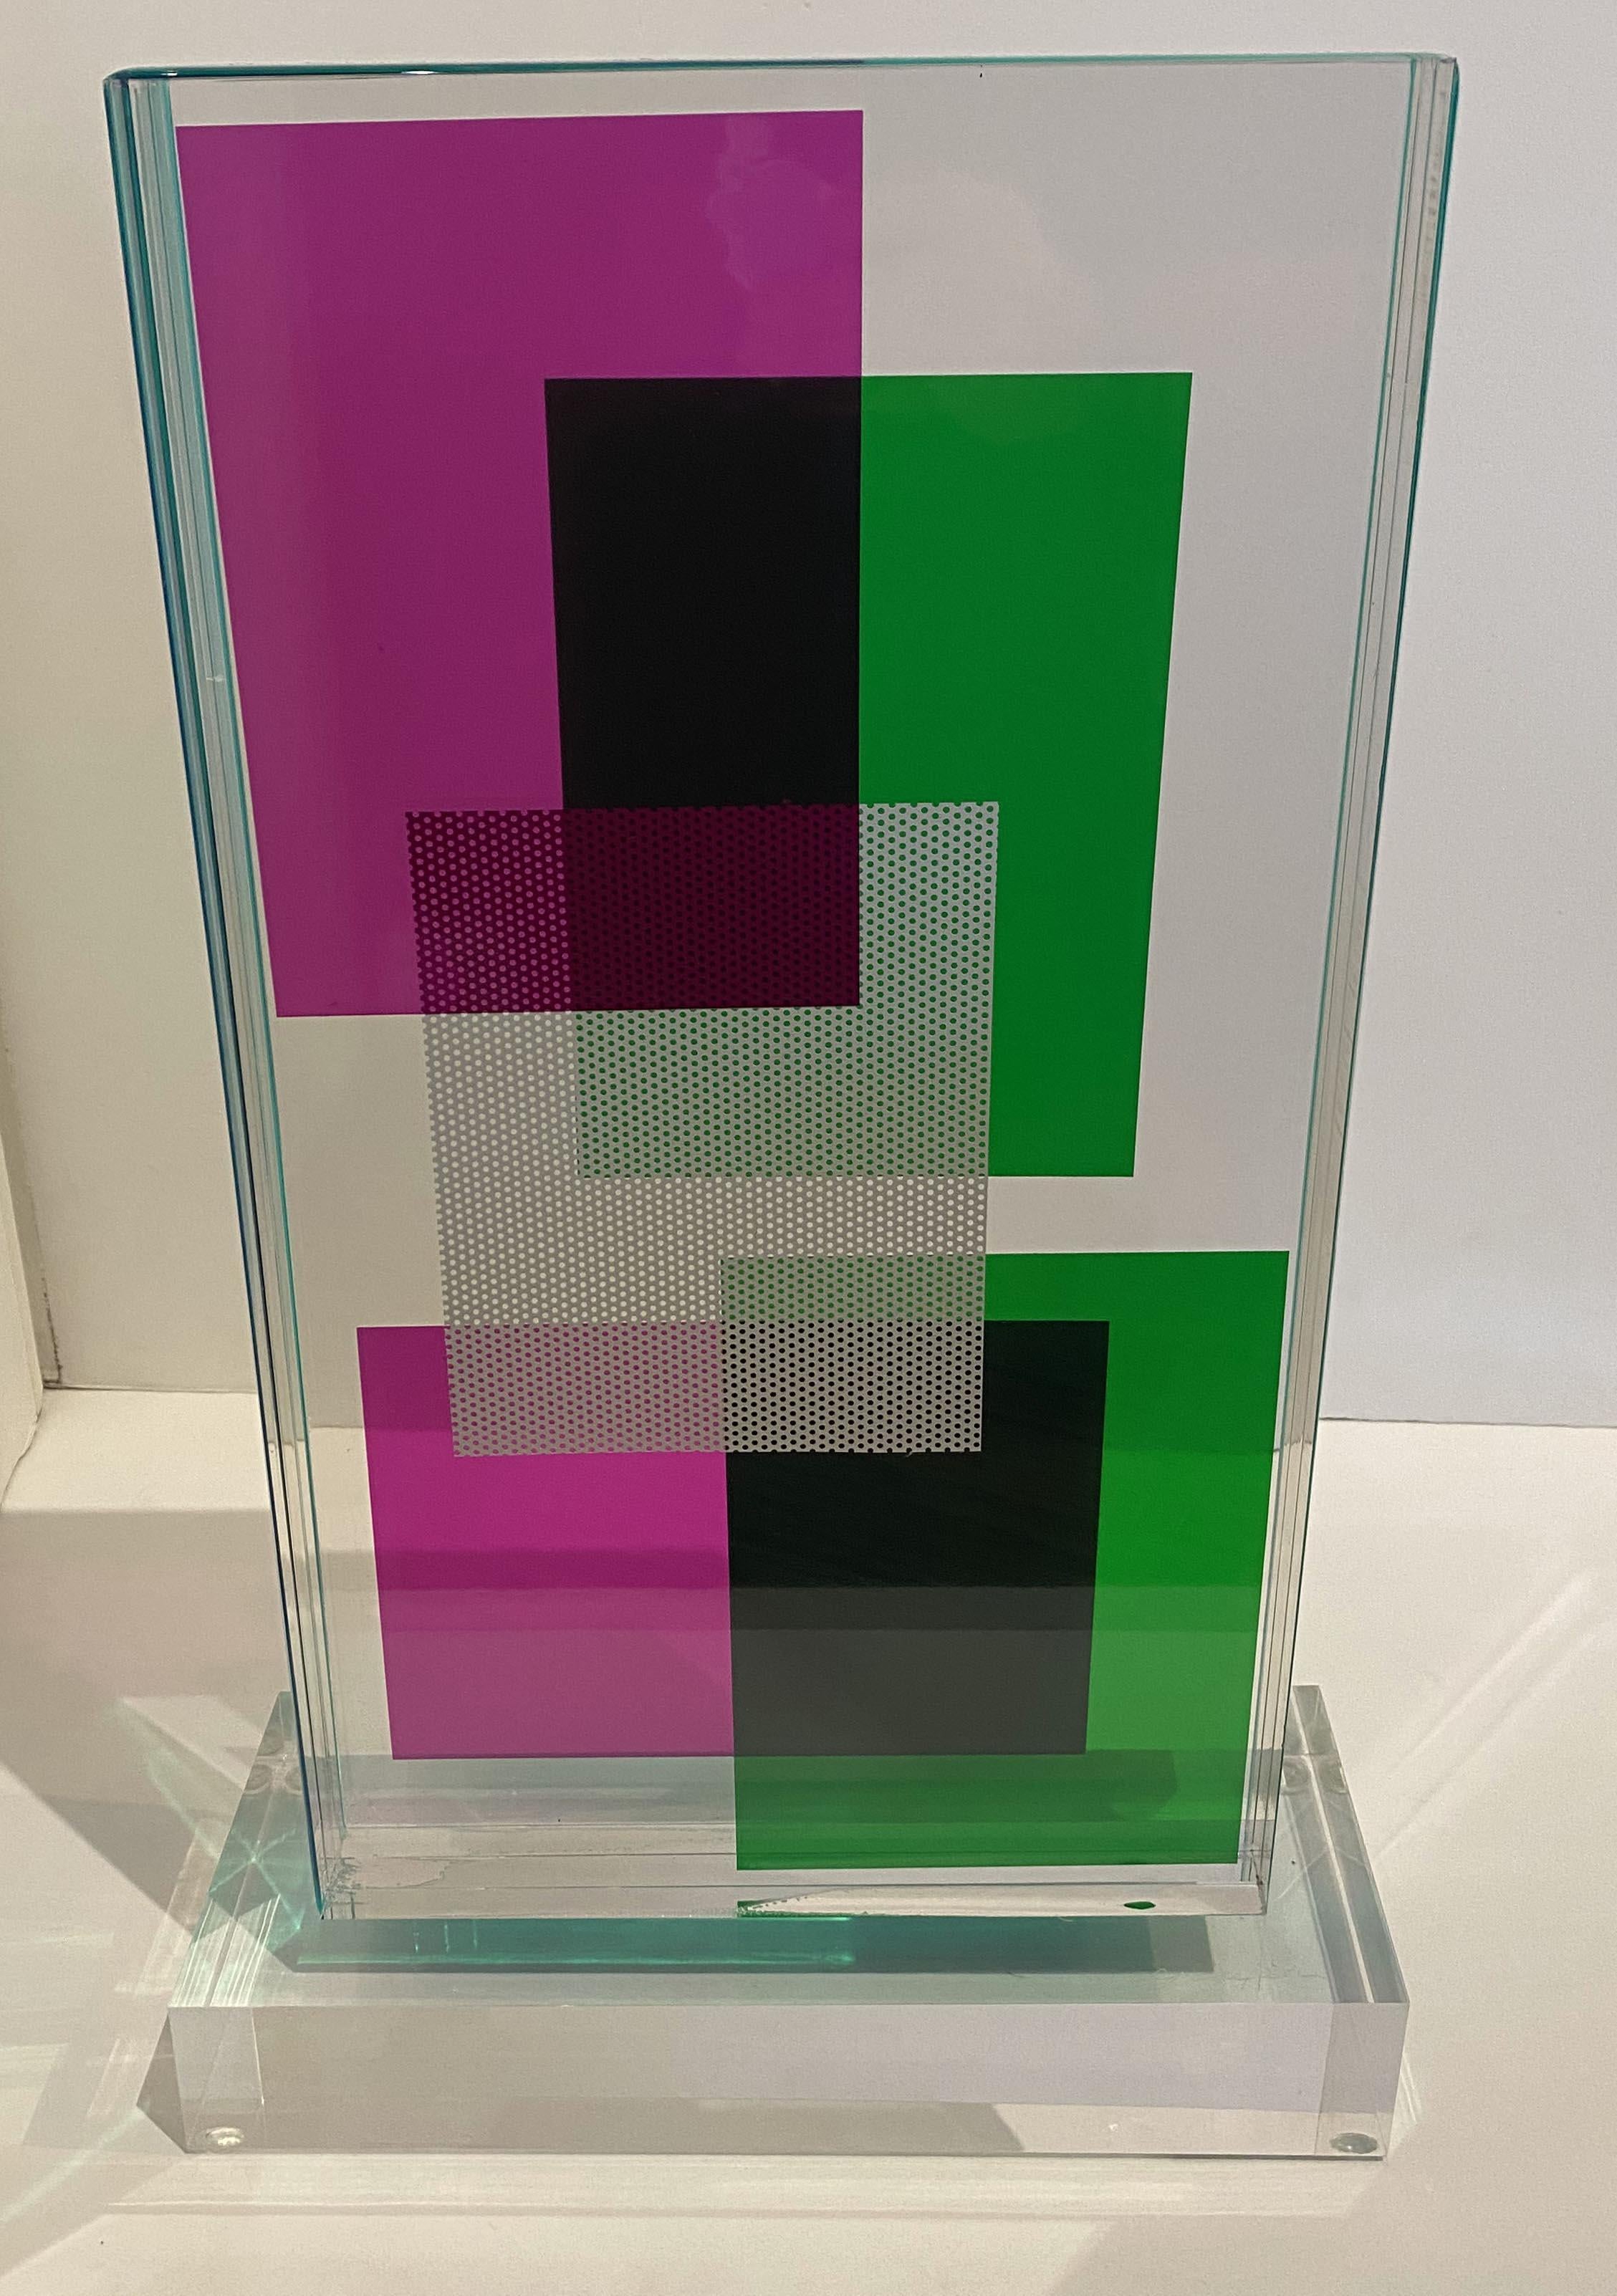 the monolithic lucite block, hand colored on the interiors, with geometric motif, laminated together, on a base. Signed by the artist.SELECTED SOLO EXHIBITIONS

Selected Exhibitions of the artist

NY Art Gallery, Santa Cruz de Tenerife, Spain